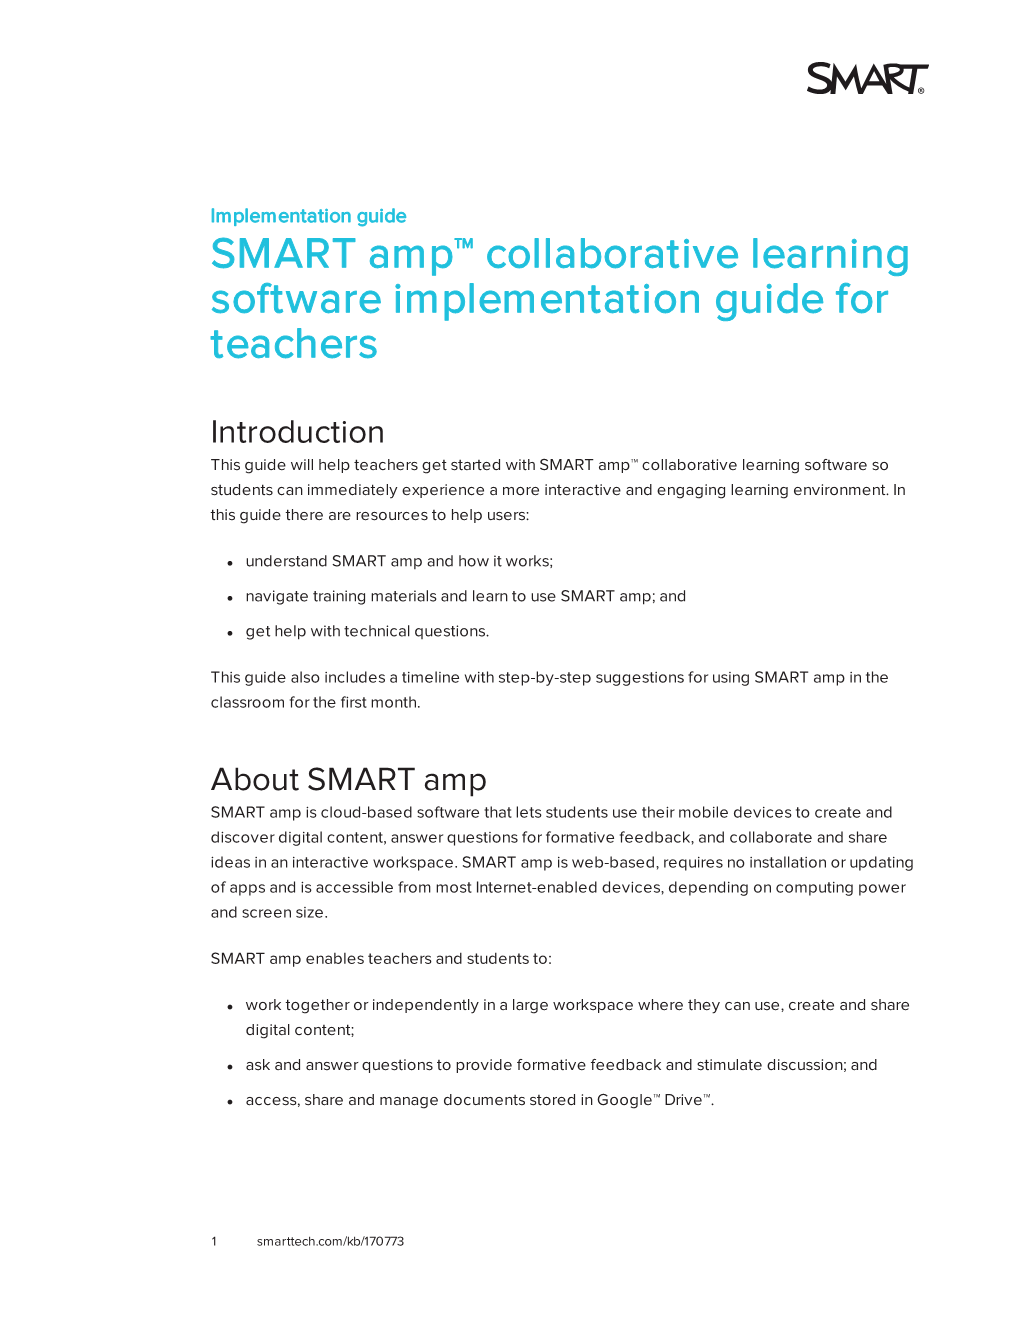 Smart Amp Collaborative Learning Software Implementation Guide for Teachers